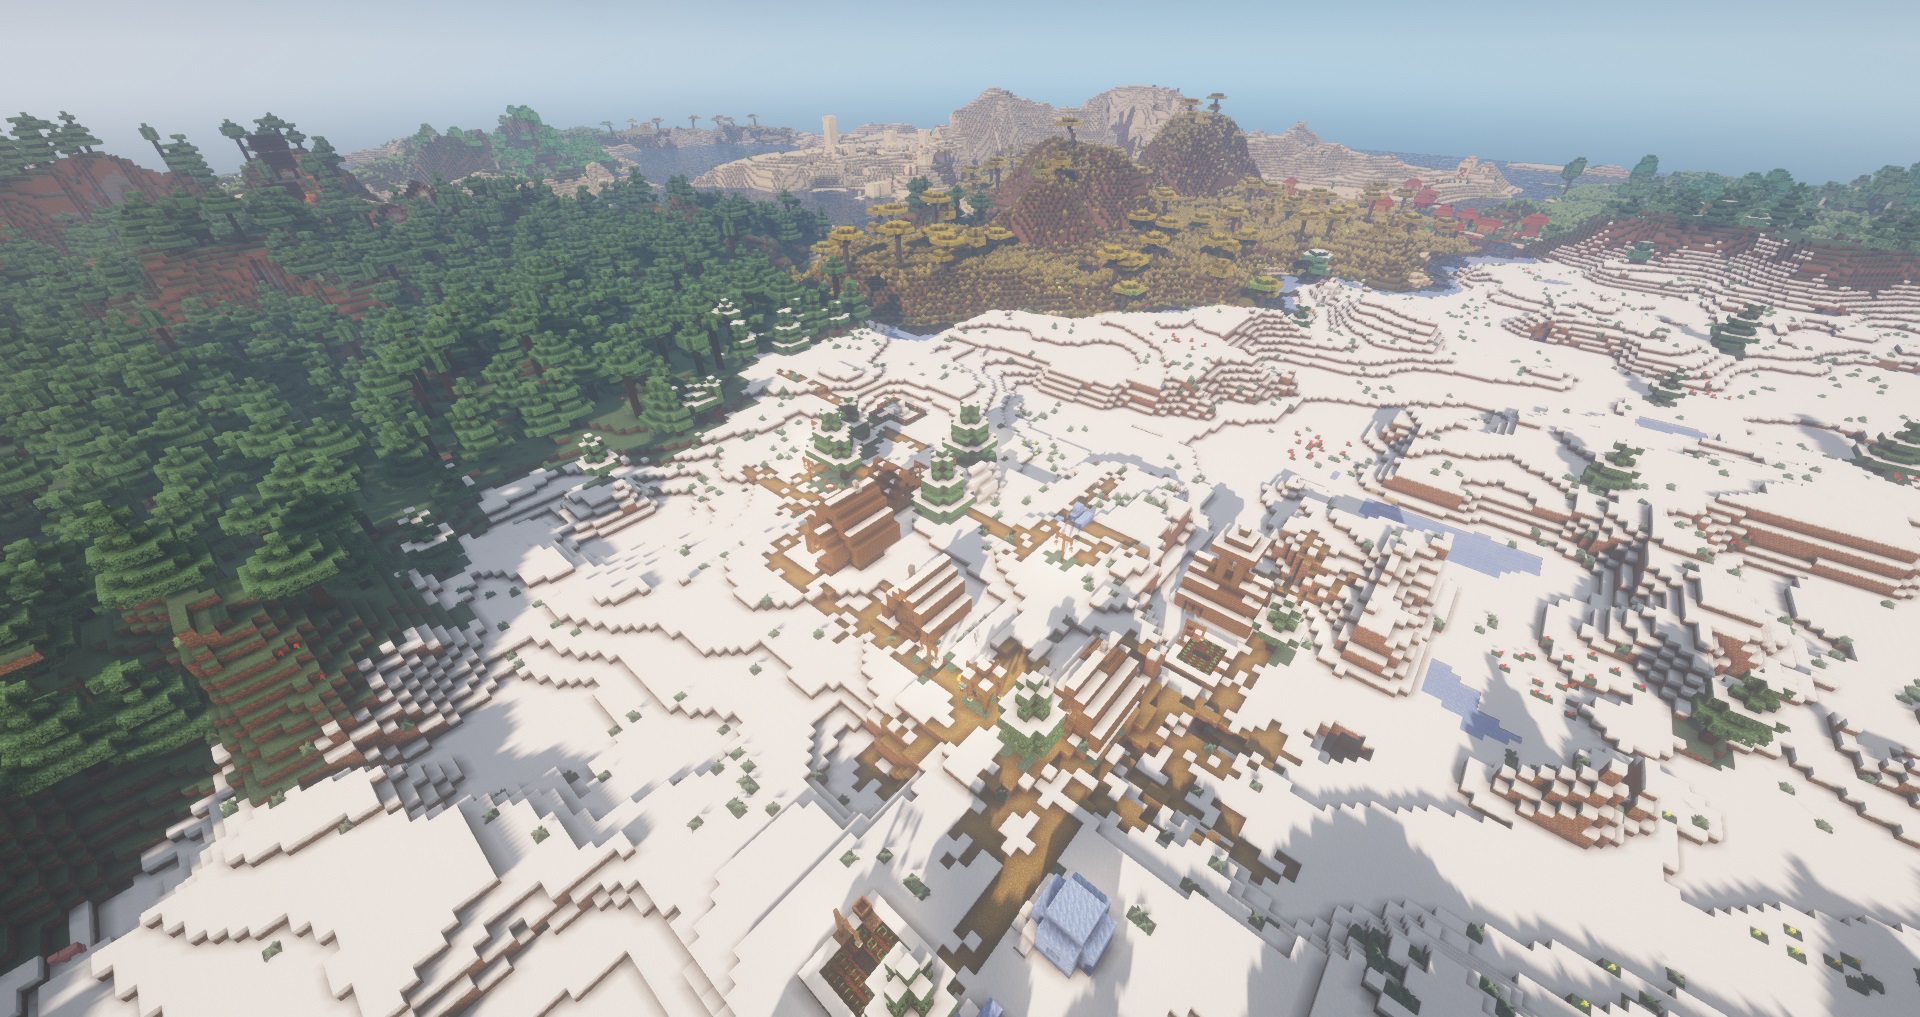 Minecraft seeds - four villages at spawn - a snowy Minecraft village seen from above with three other biome villages in the distance